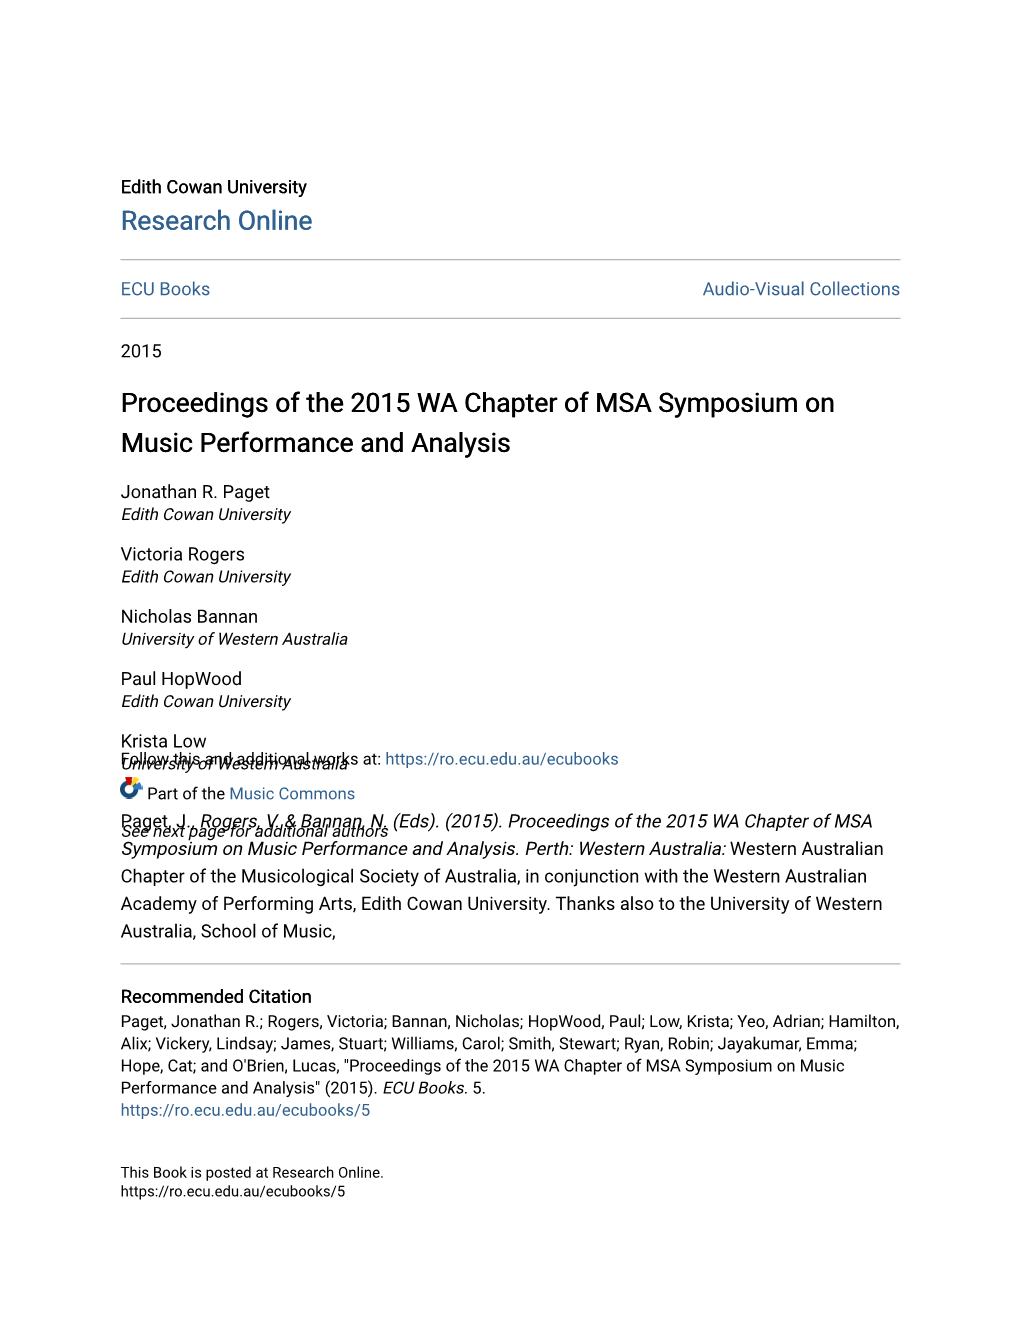 Proceedings of the 2015 WA Chapter of MSA Symposium on Music Performance and Analysis